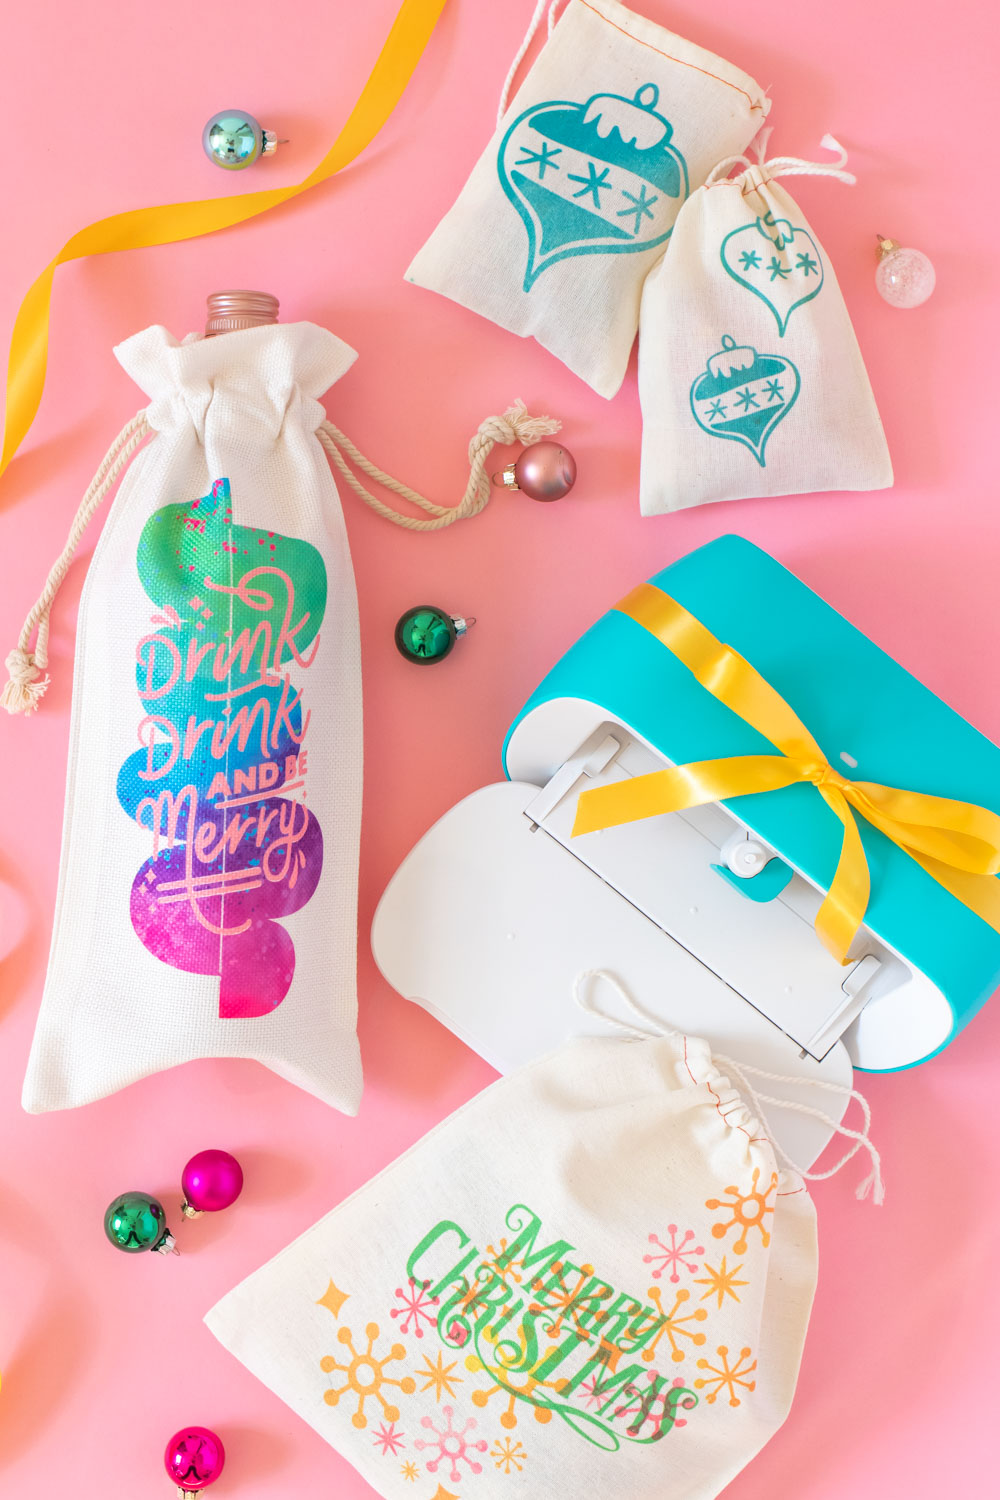 assortment of DIY holiday gift packaging ideas made with Cricut and vibrant colors